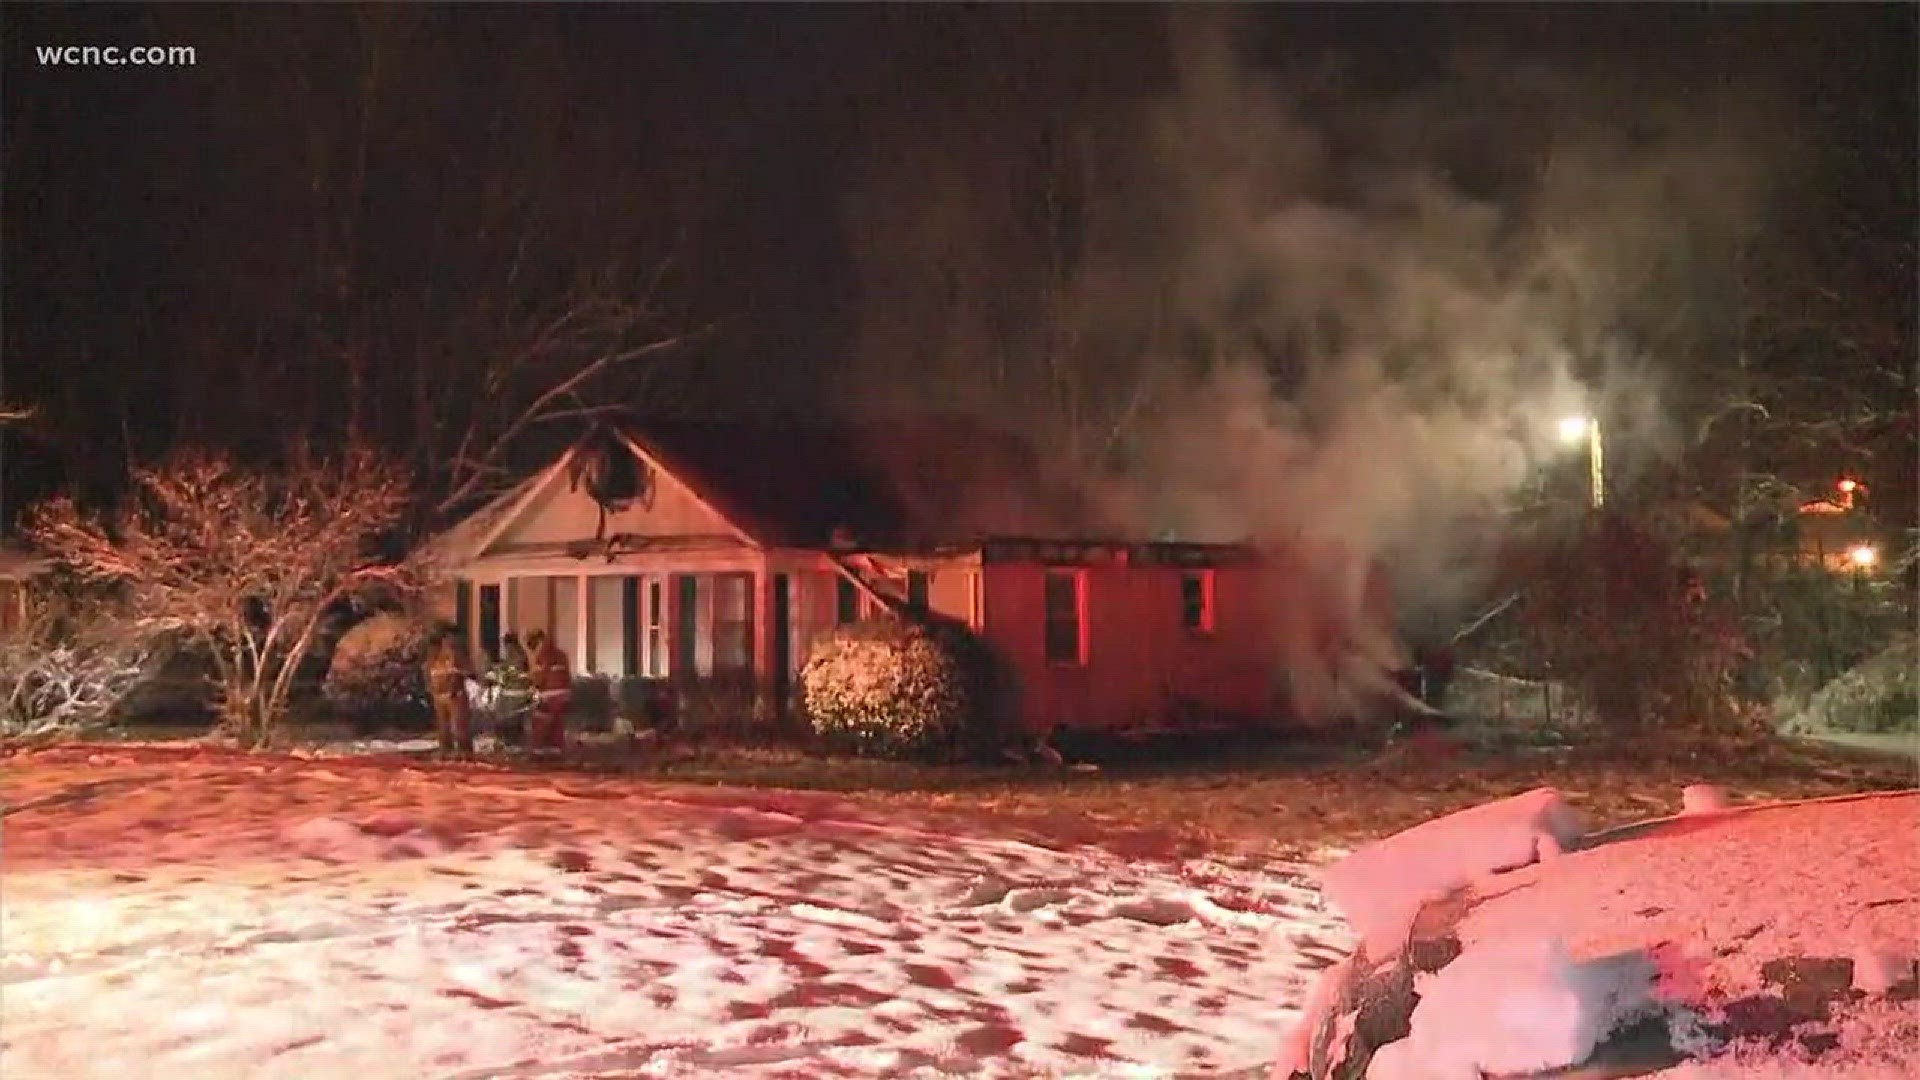 Charlotte firefighters responded to a house fire in northeast Charlotte early Thursday.